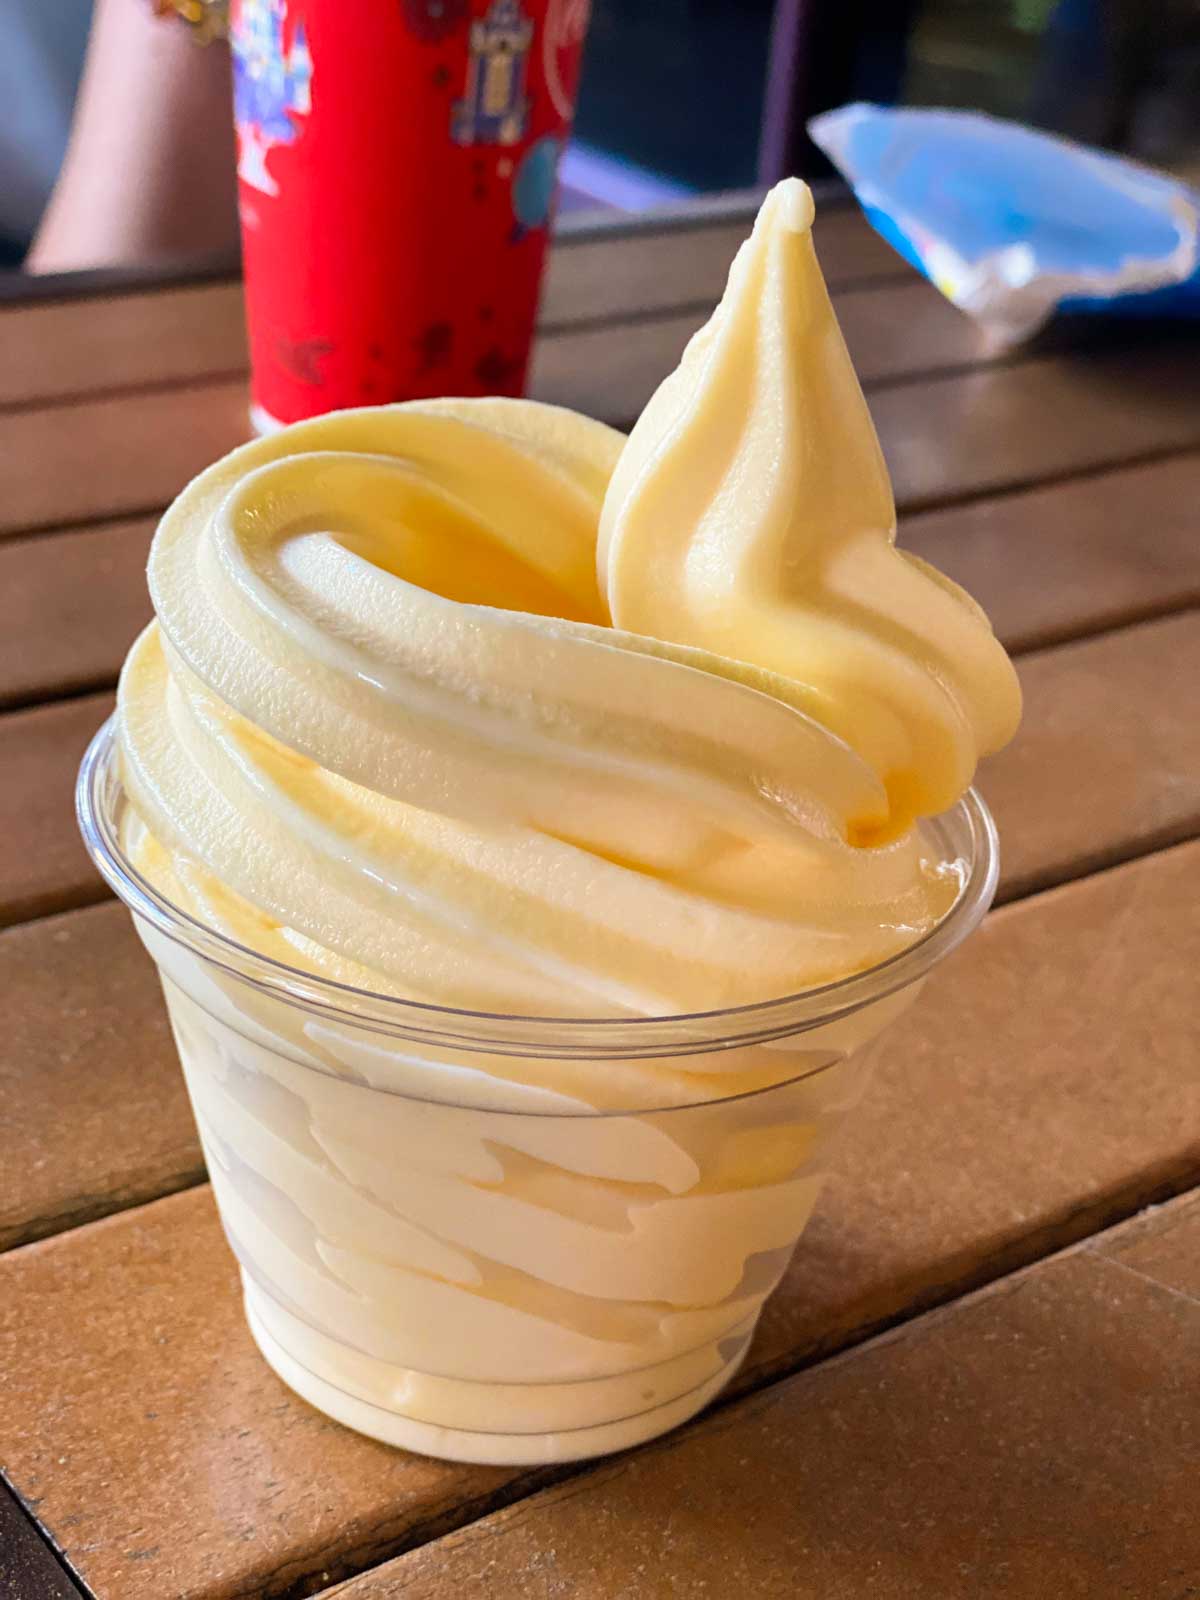 A simple Dole whip has a rum addition to the cup.